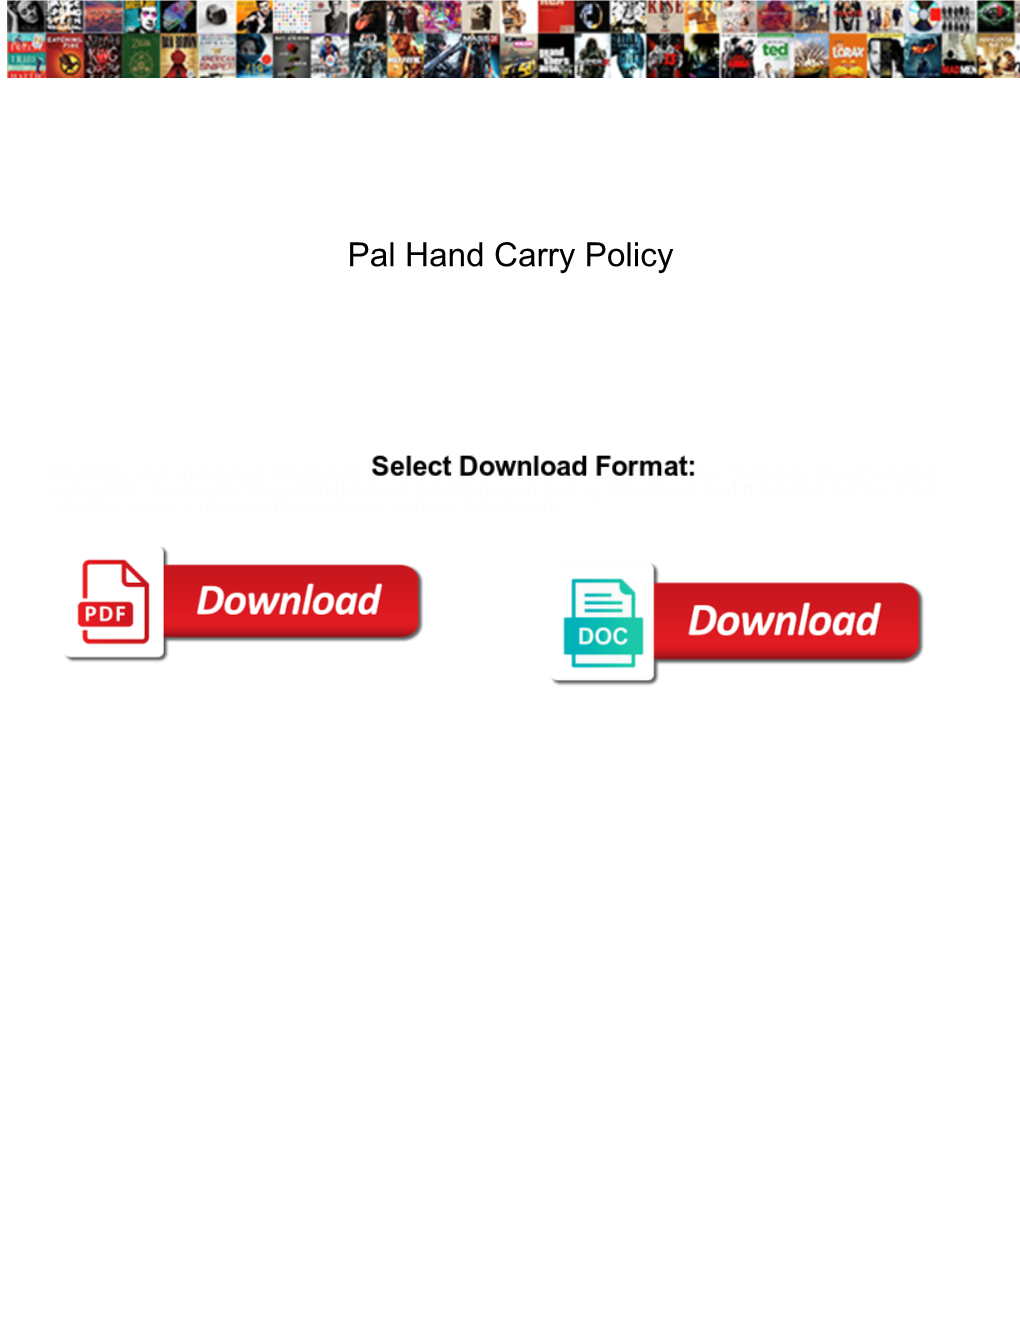 Pal Hand Carry Policy